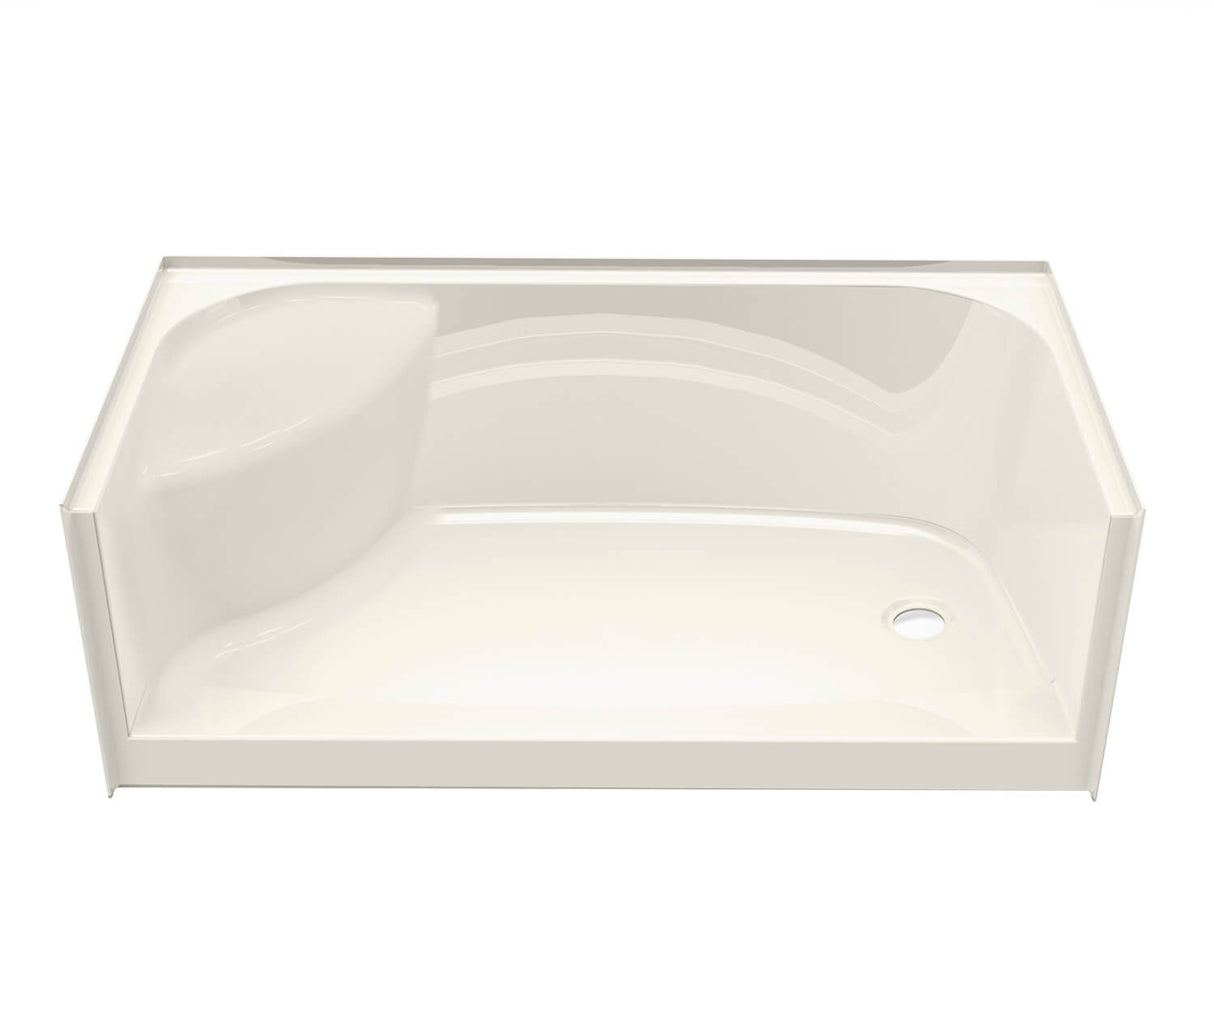 Aker SPS 3060 AcrylX Alcove Left-Hand Drain Shower Base in Biscuit